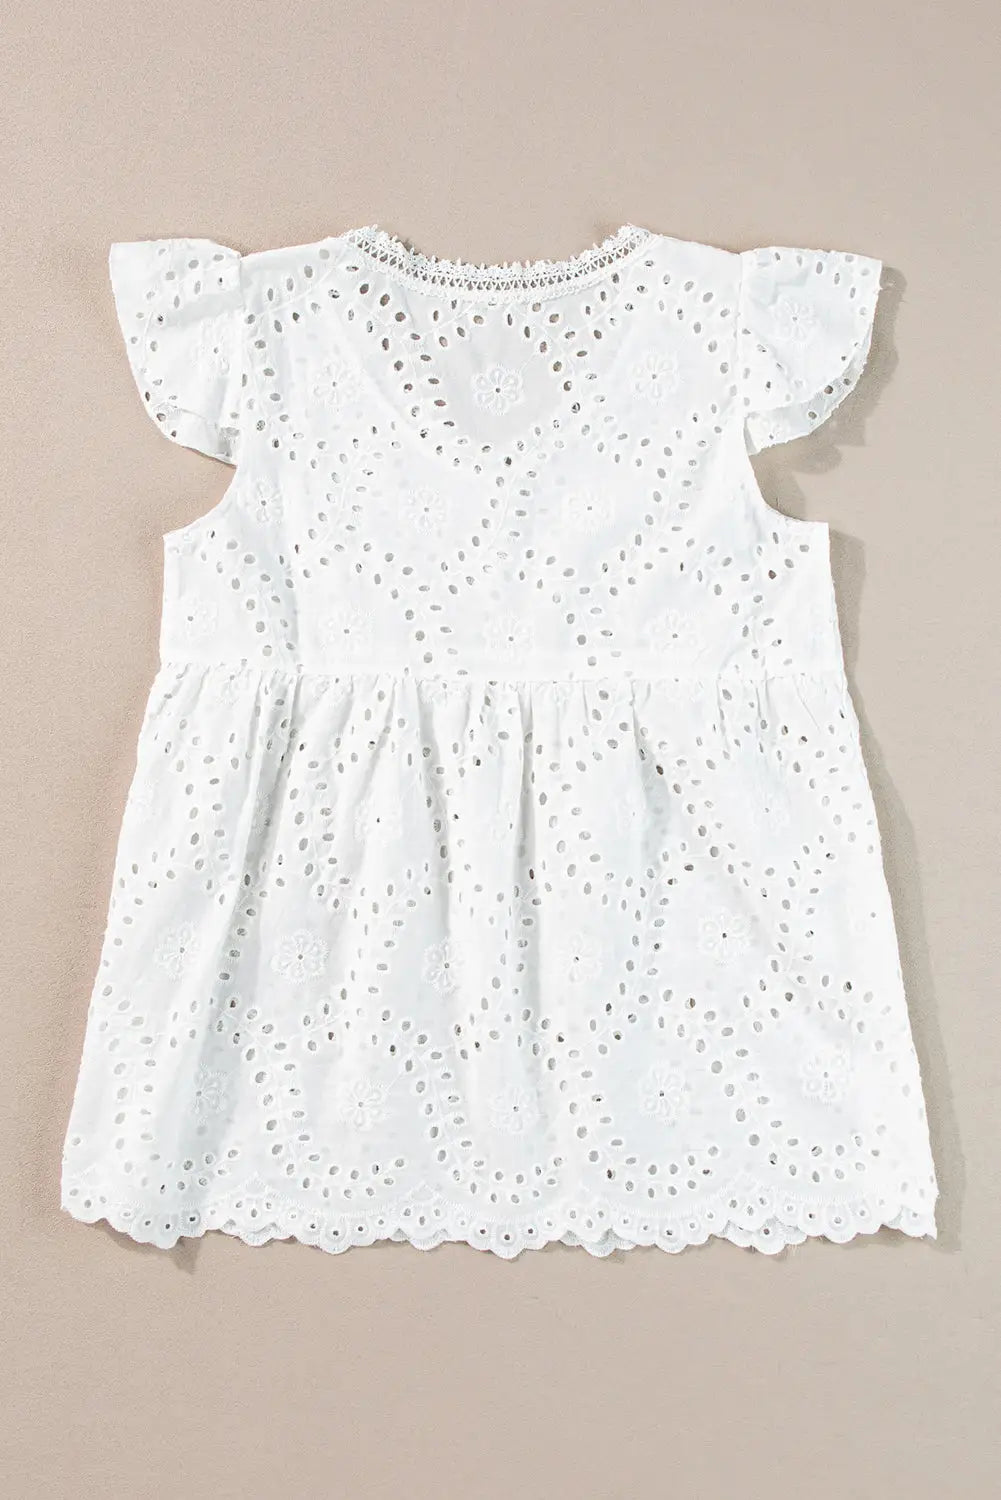 White v neck ruffled embroidered sleeveless top - tops/blouses & shirts